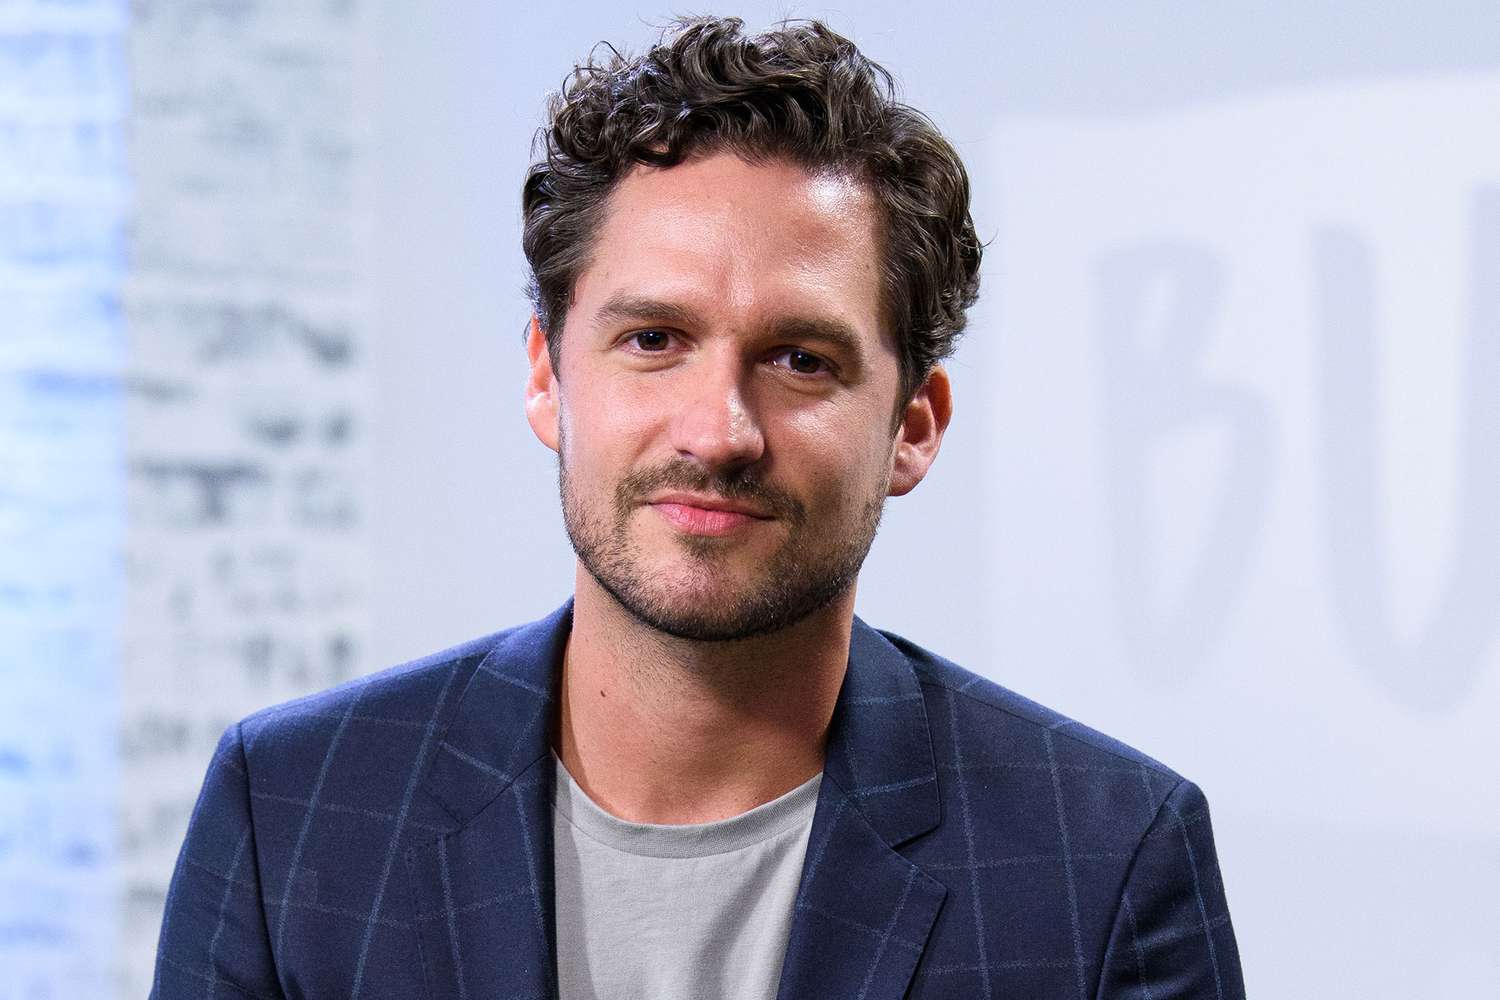 ‘Knock at the Cabin’ star Ben Aldridge defies Hollywood fears after coming out